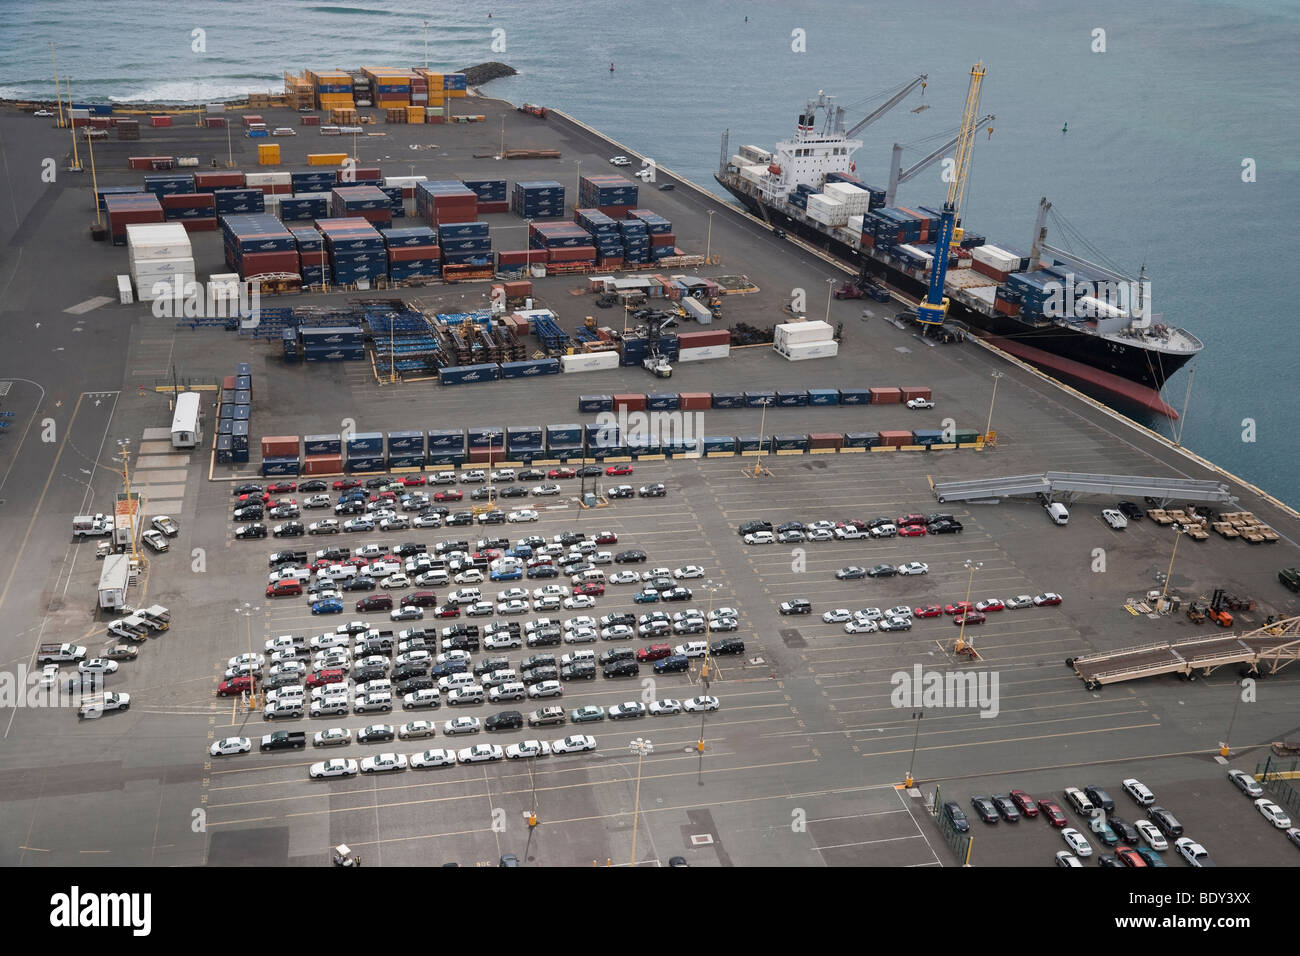 Aerial view of autos imported and containerized cargo container and cargo ship on Sand Island, Honolulu, Hawaii. Stock Photo